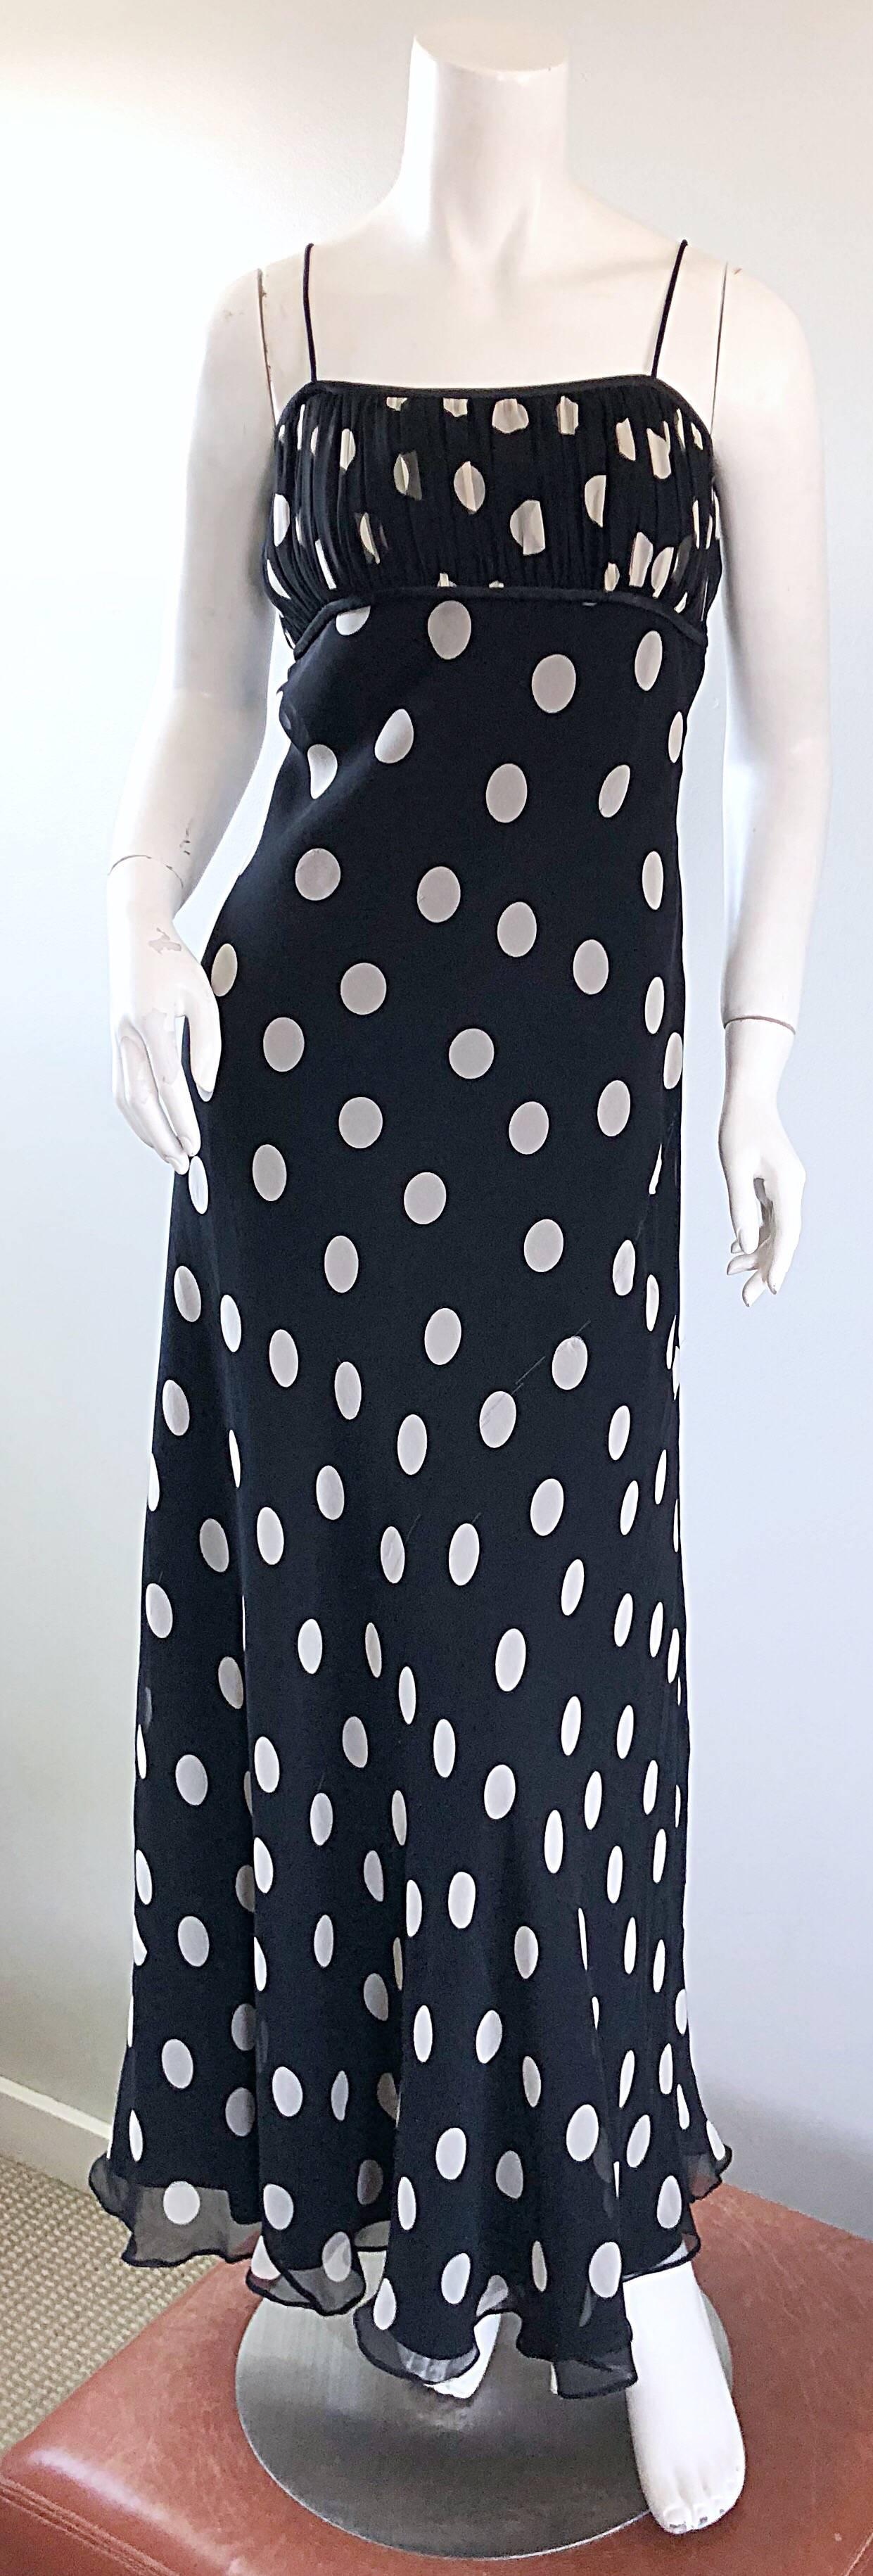 Chic vintage 90s ABRIELE MELANO black and white polka dot silk chiffon gown! Classic oversized polka dots on a spaghetti strap full length dress. Pleated details on the empire bodice with a forgiving loose fitting skirt. Hidden zipper up the side